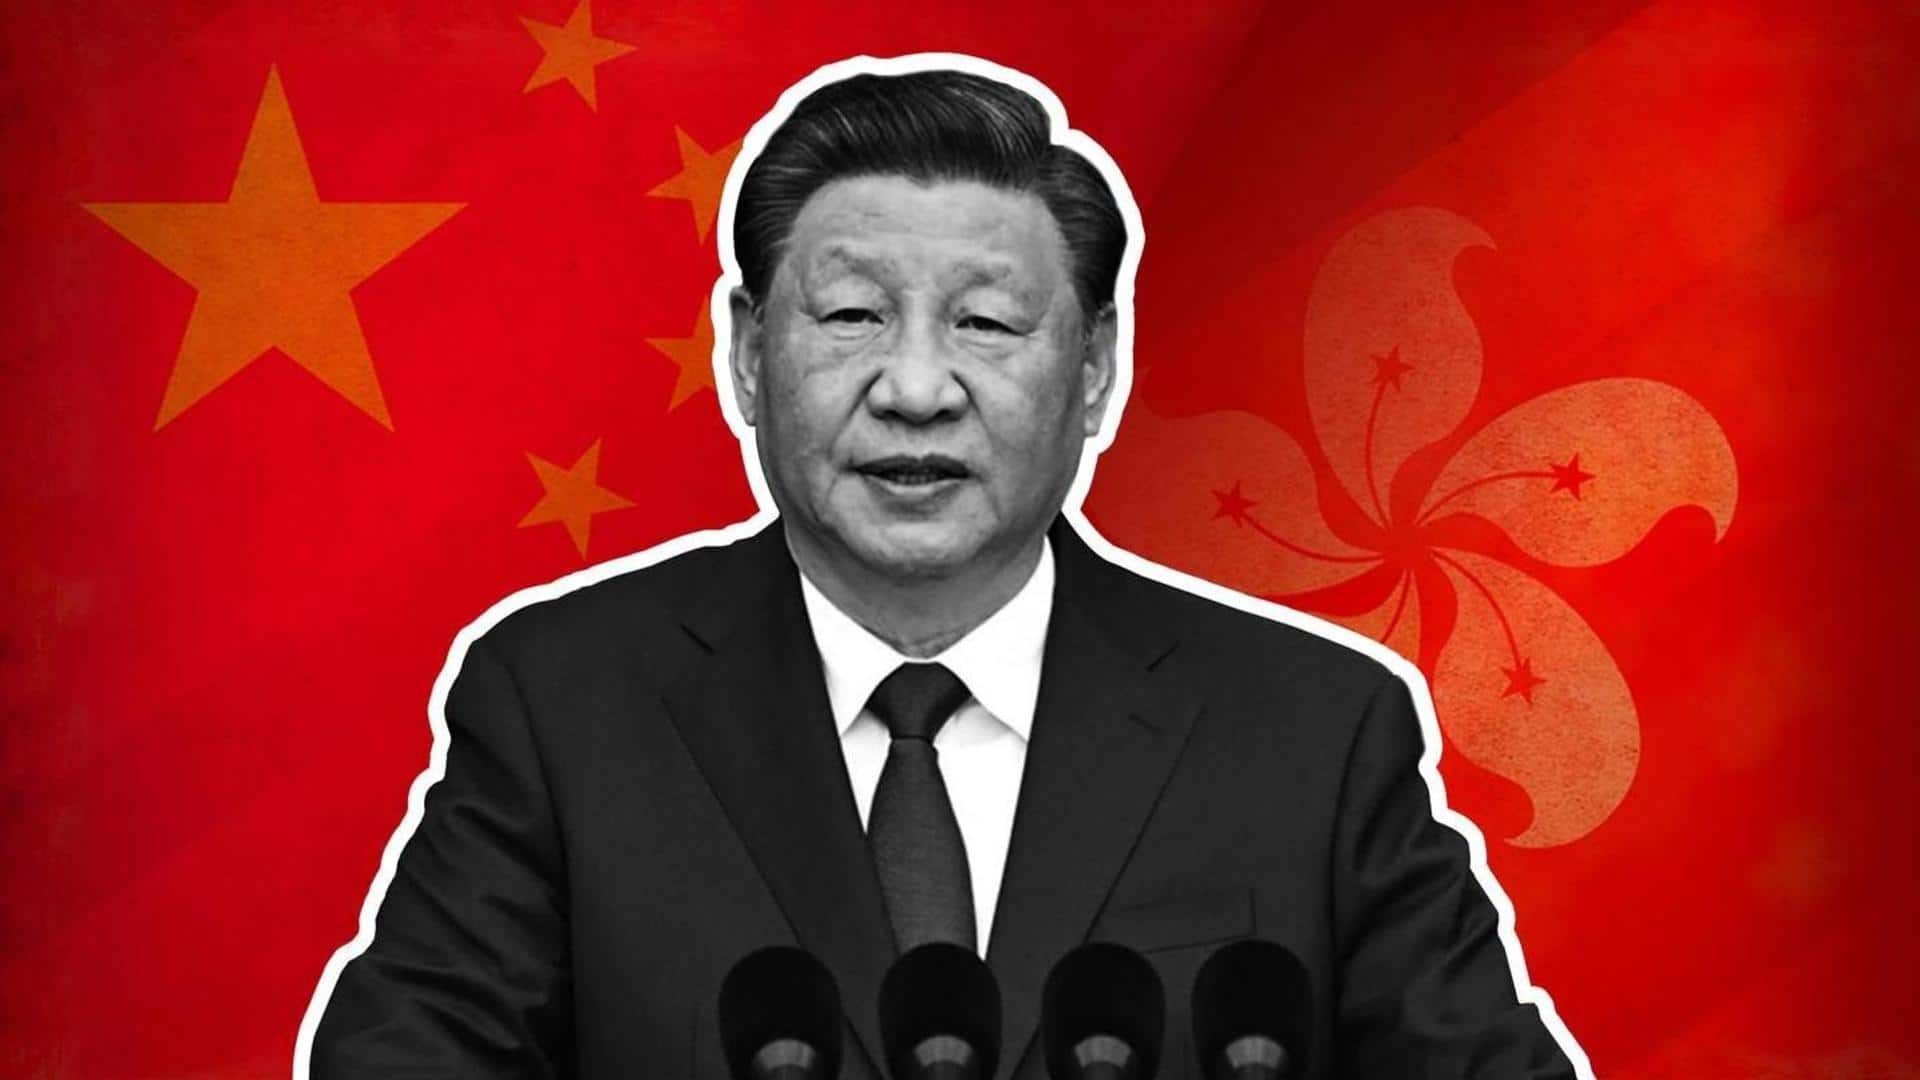 Xi Jinping secures unprecedented 3rd term as Chinese president